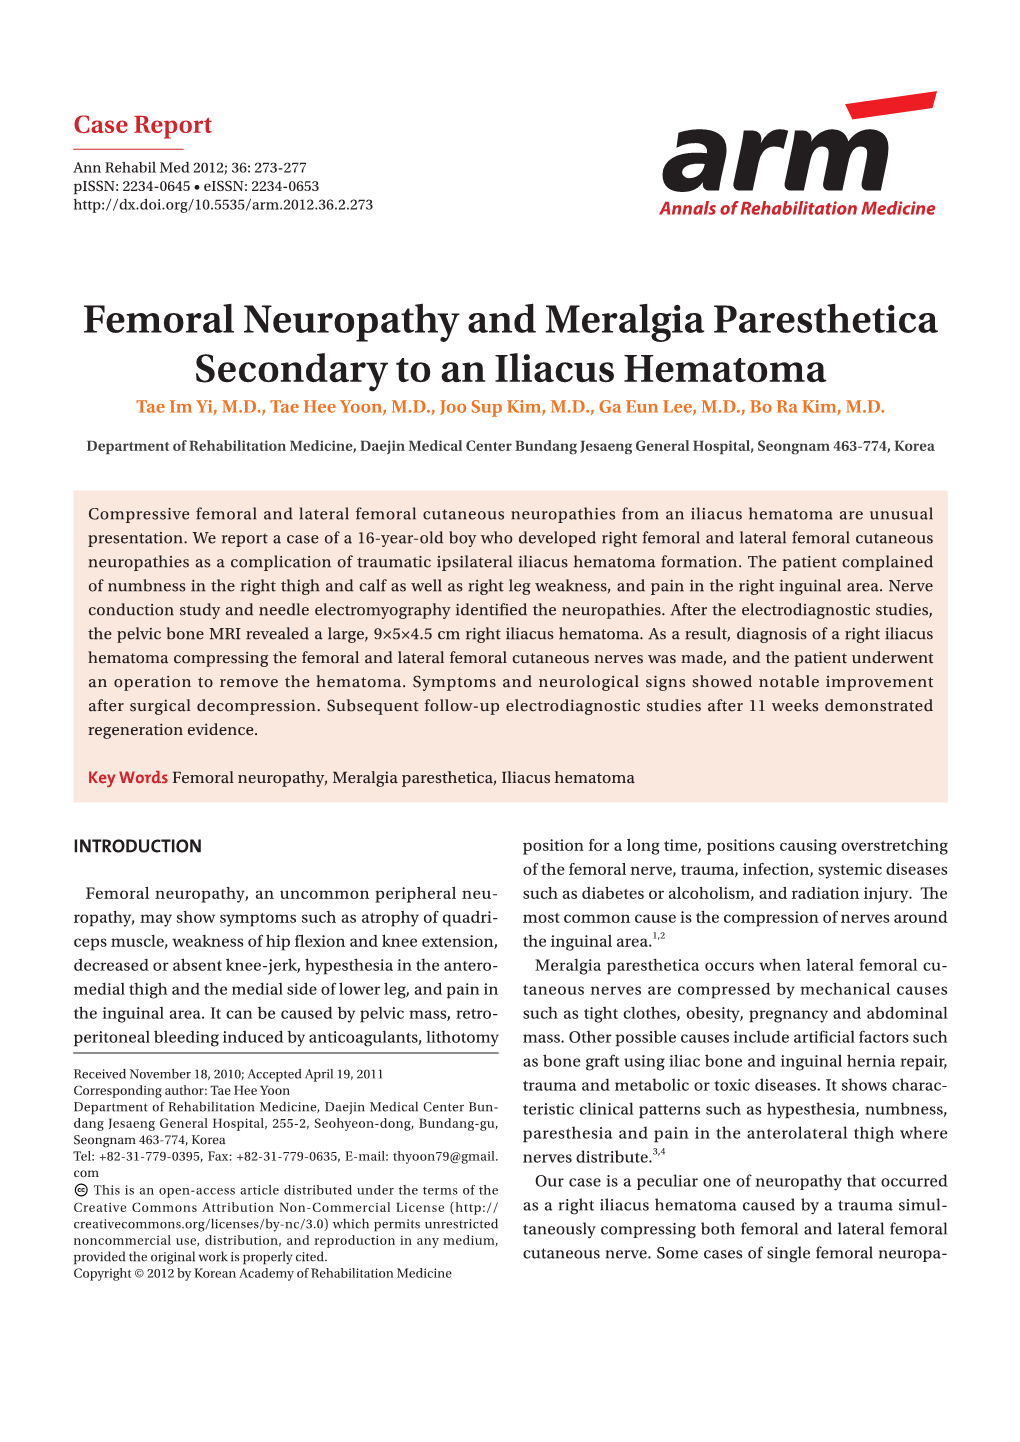 Femoral Neuropathy and Meralgia Paresthetica Secondary to an Iliacus Hematoma Tae Im Yi, M.D., Tae Hee Yoon, M.D., Joo Sup Kim, M.D., Ga Eun Lee, M.D., Bo Ra Kim, M.D